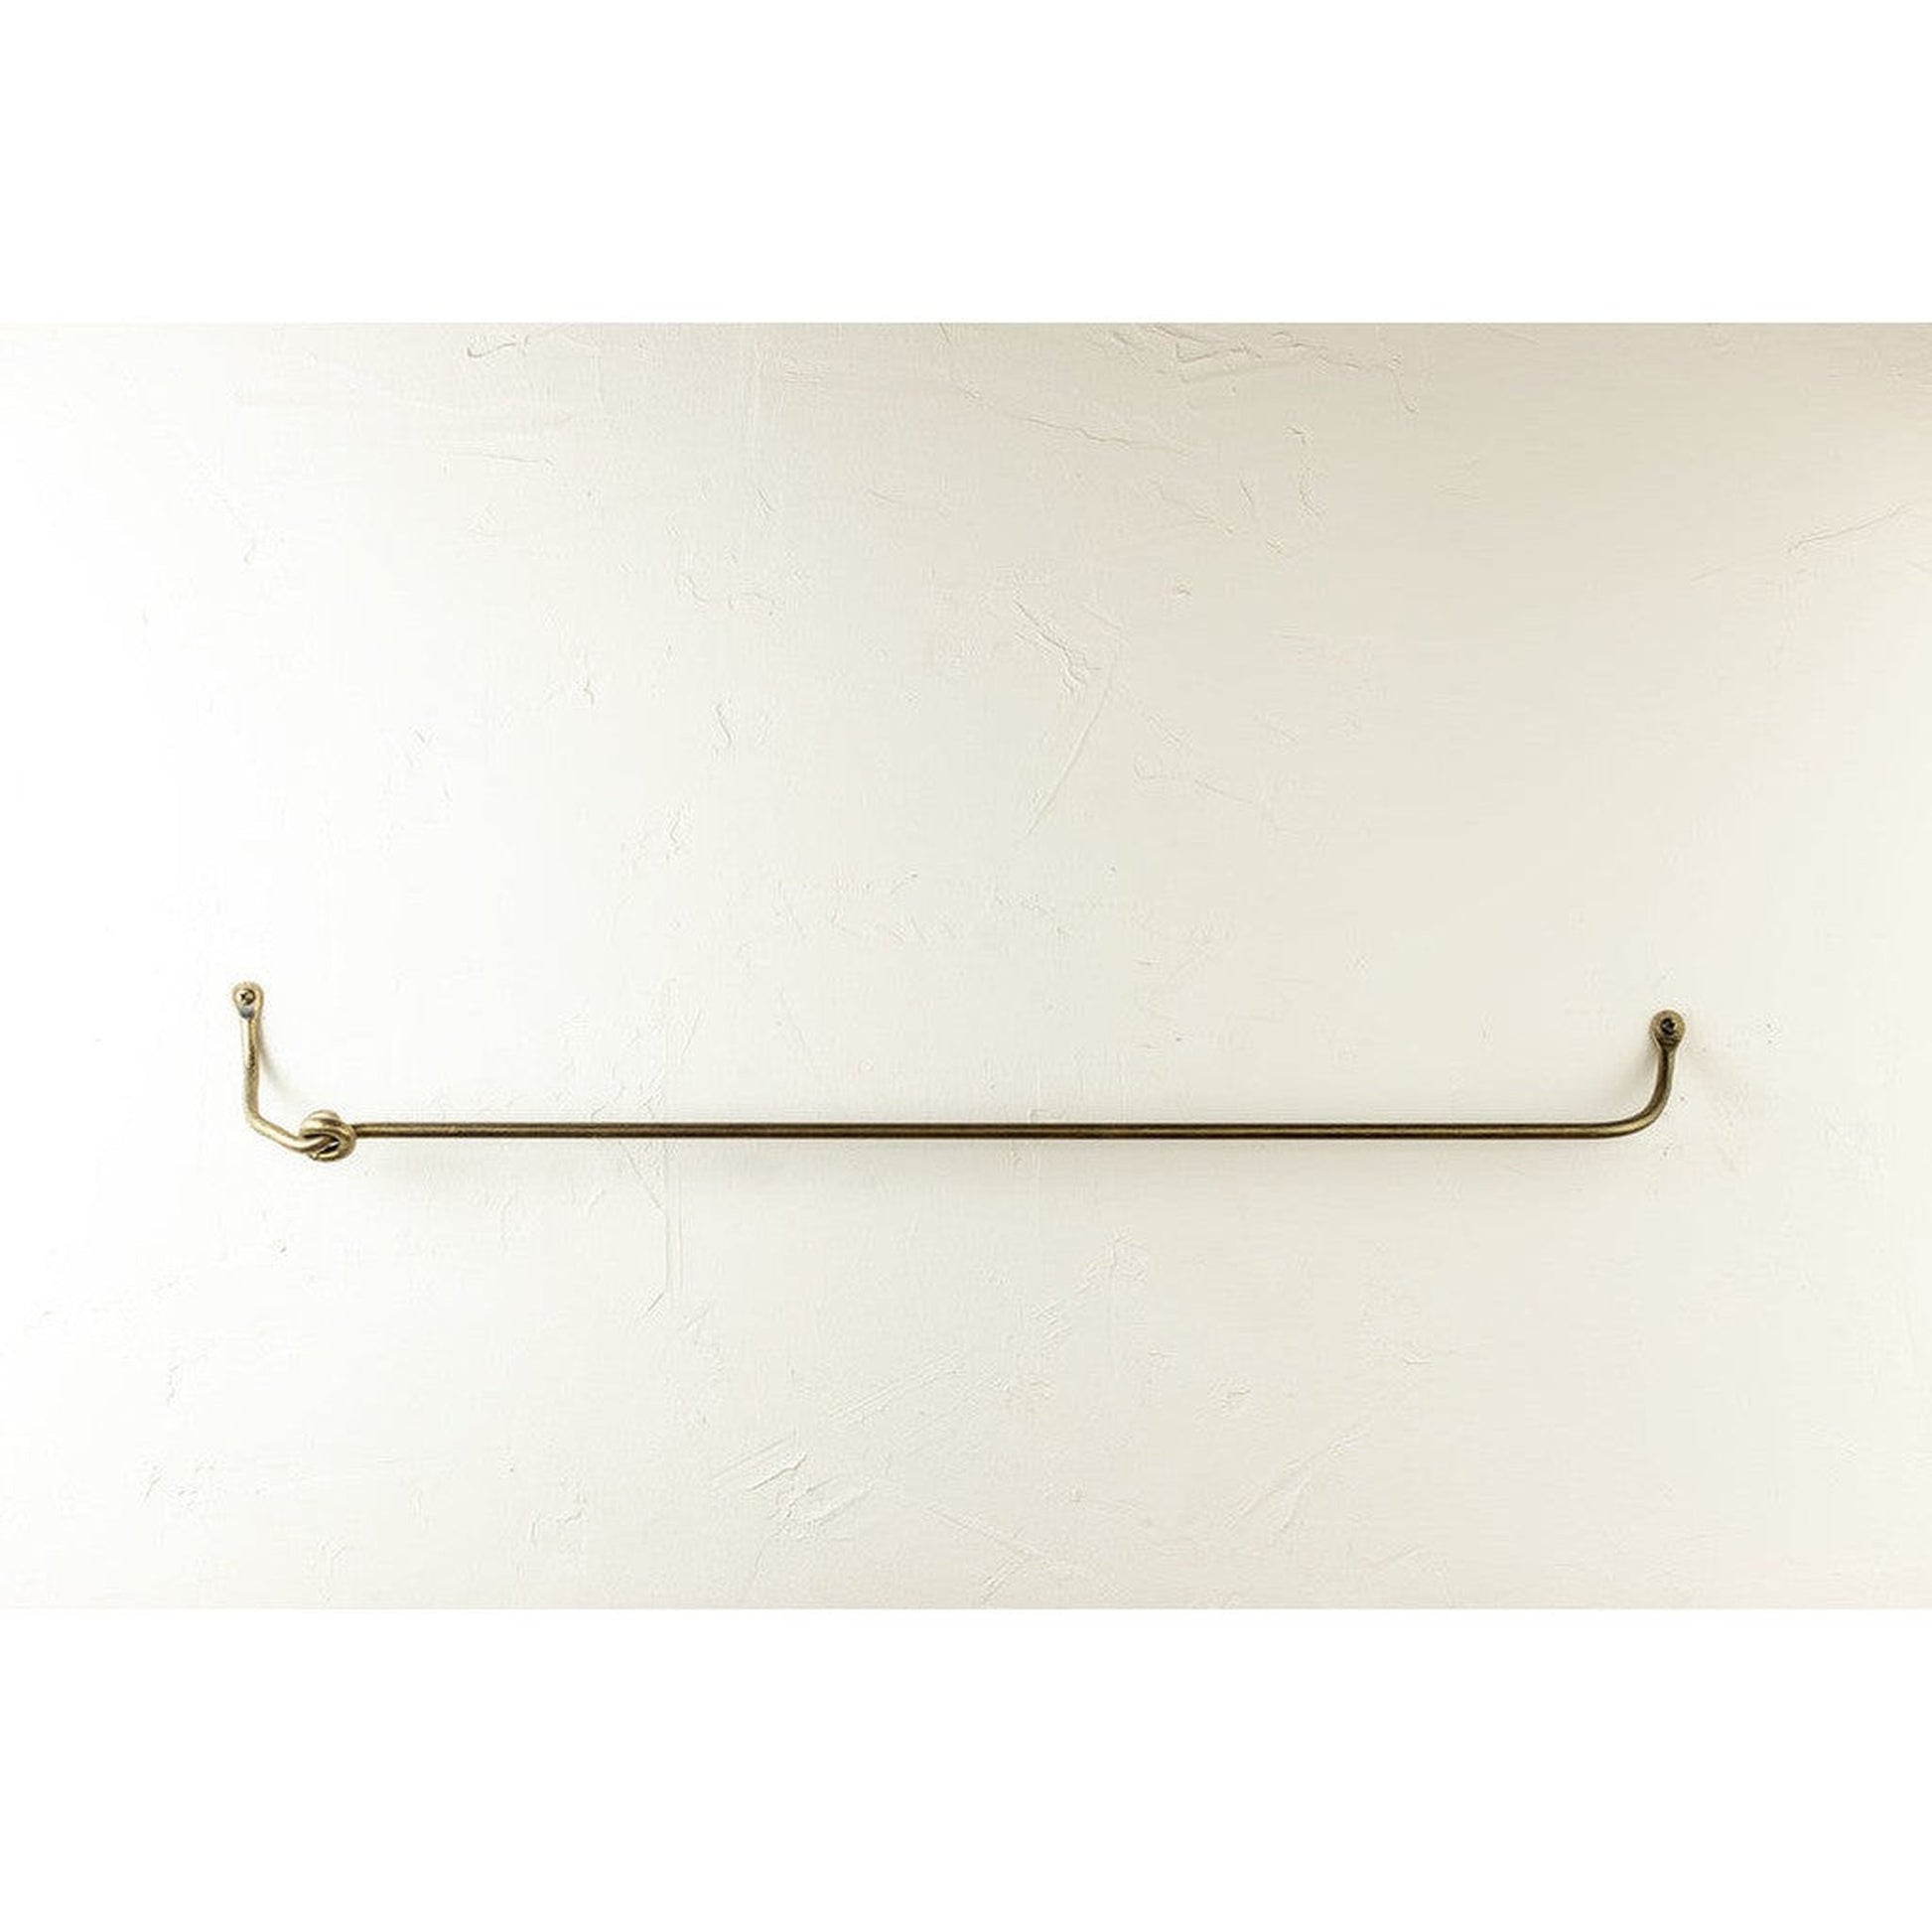 Stone County Ironworks Knot 24" Hand Rubbed Bronze Iron Towel Bar